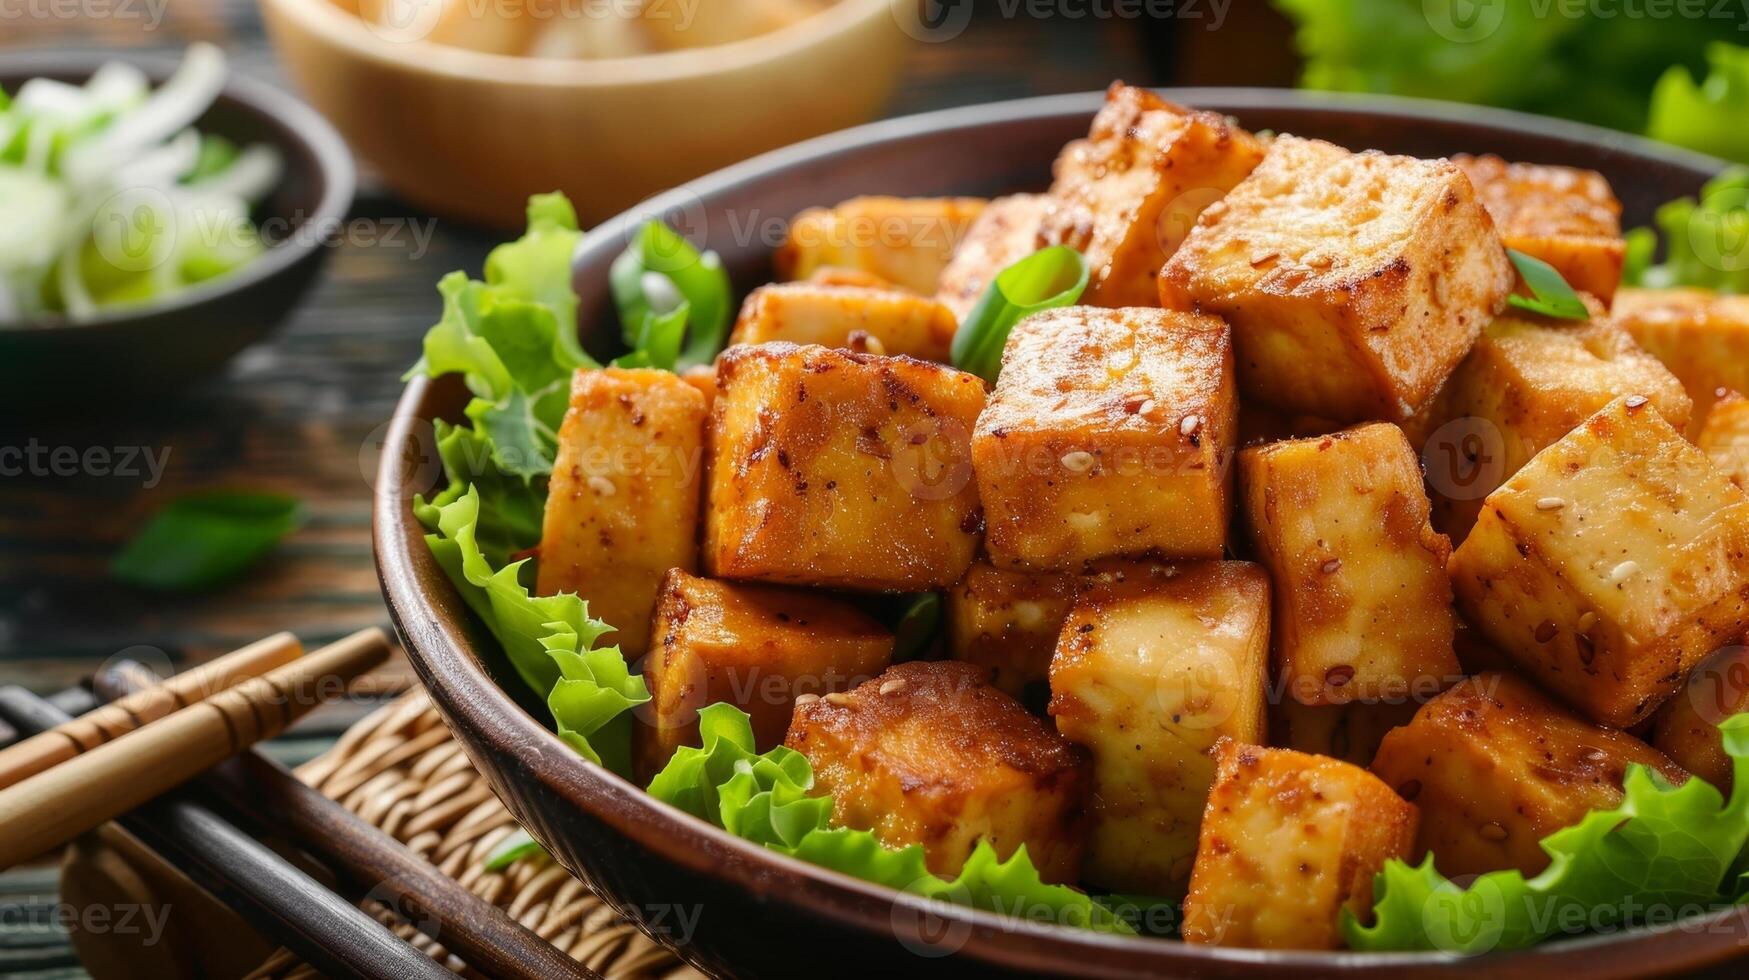 Golden cubes of fried tofu are carefully p on top adding a vegetarian protein source photo